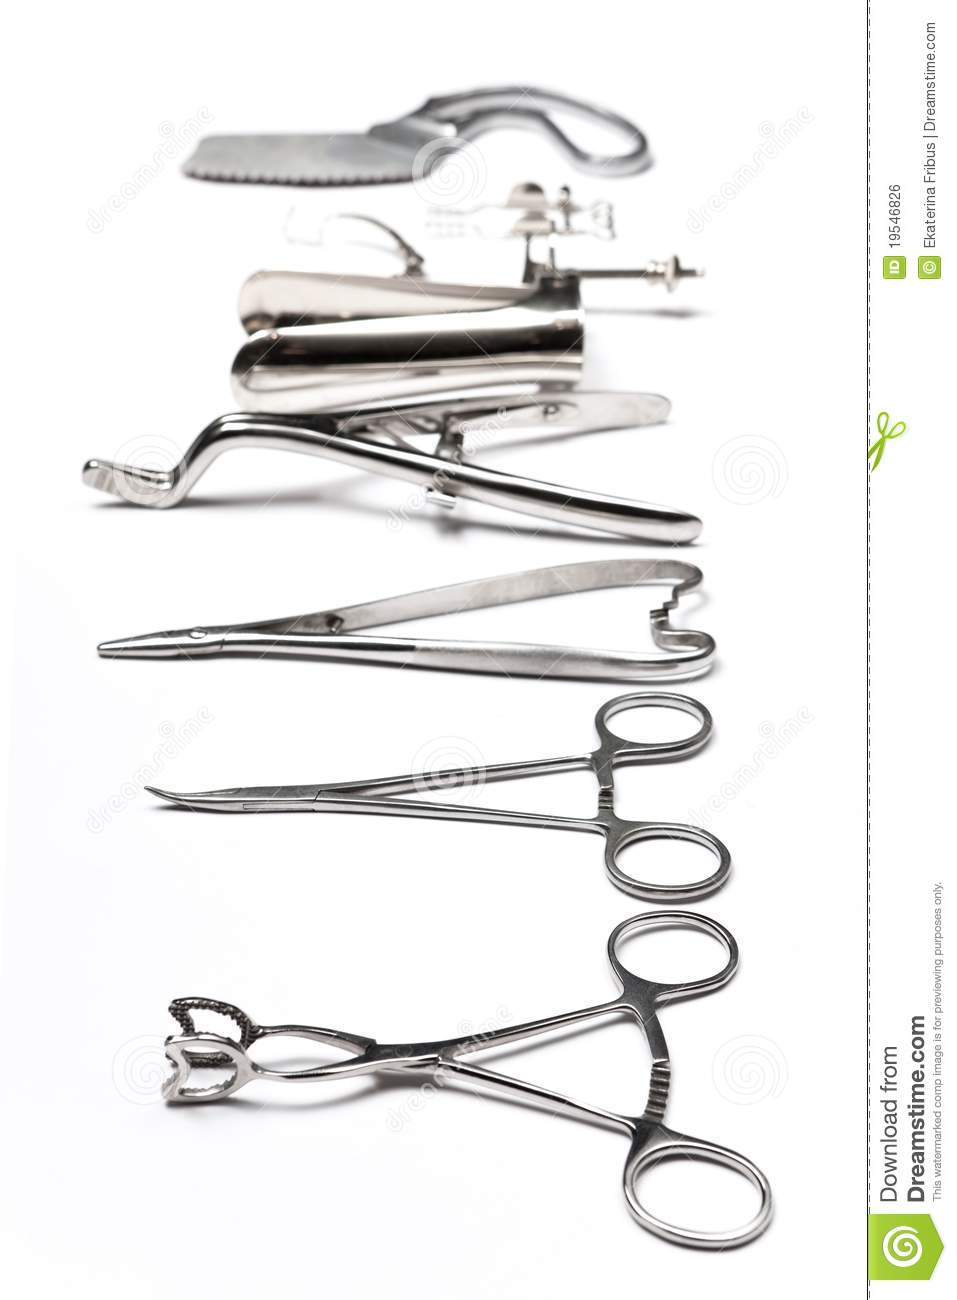 Surgical Instruments Royalty Free Stock Image   Image  19546826